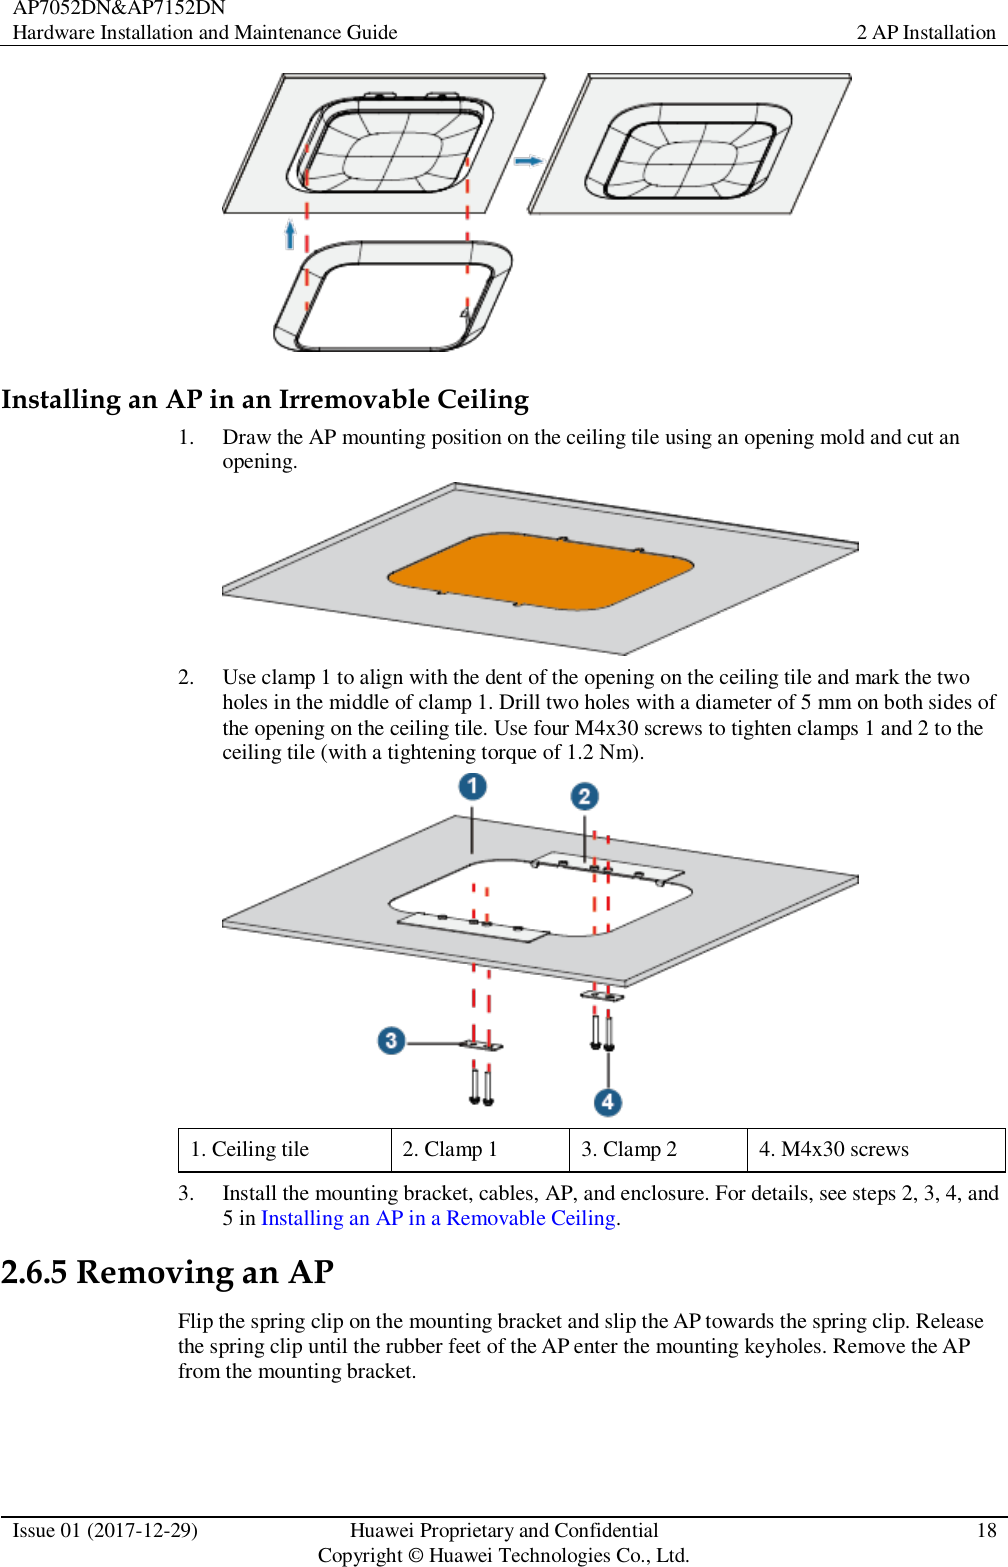 AP7052DN&amp;AP7152DN Hardware Installation and Maintenance Guide 2 AP Installation  Issue 01 (2017-12-29) Huawei Proprietary and Confidential                                     Copyright © Huawei Technologies Co., Ltd. 18   Installing an AP in an Irremovable Ceiling 1. Draw the AP mounting position on the ceiling tile using an opening mold and cut an opening.  2. Use clamp 1 to align with the dent of the opening on the ceiling tile and mark the two holes in the middle of clamp 1. Drill two holes with a diameter of 5 mm on both sides of the opening on the ceiling tile. Use four M4x30 screws to tighten clamps 1 and 2 to the ceiling tile (with a tightening torque of 1.2 Nm).  1. Ceiling tile 2. Clamp 1 3. Clamp 2 4. M4x30 screws 3. Install the mounting bracket, cables, AP, and enclosure. For details, see steps 2, 3, 4, and 5 in Installing an AP in a Removable Ceiling. 2.6.5 Removing an AP Flip the spring clip on the mounting bracket and slip the AP towards the spring clip. Release the spring clip until the rubber feet of the AP enter the mounting keyholes. Remove the AP from the mounting bracket. 